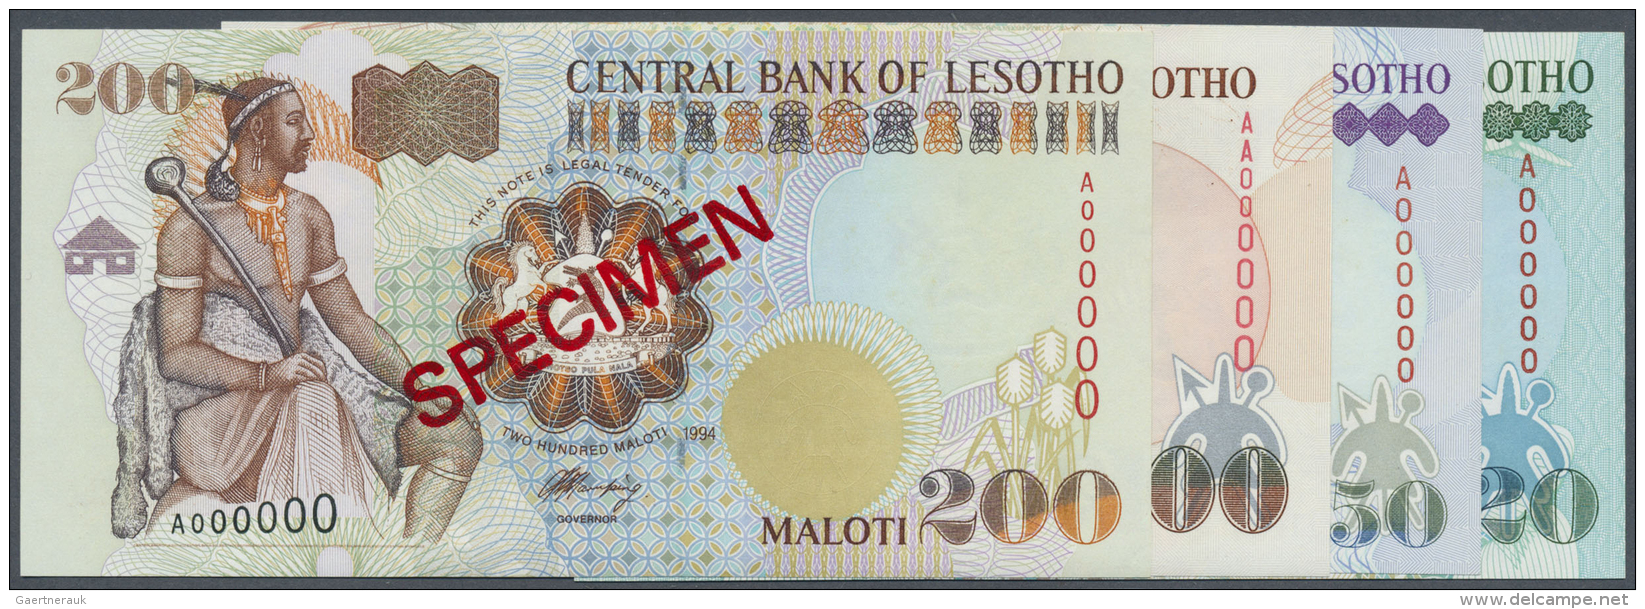 Lesotho: Set Of 4 Specimen Banknotes Containing 20, 50, 100 And 200 Maloti 1994 P. 16s-18s, 20s, All In Condition: UNC. - Lesotho